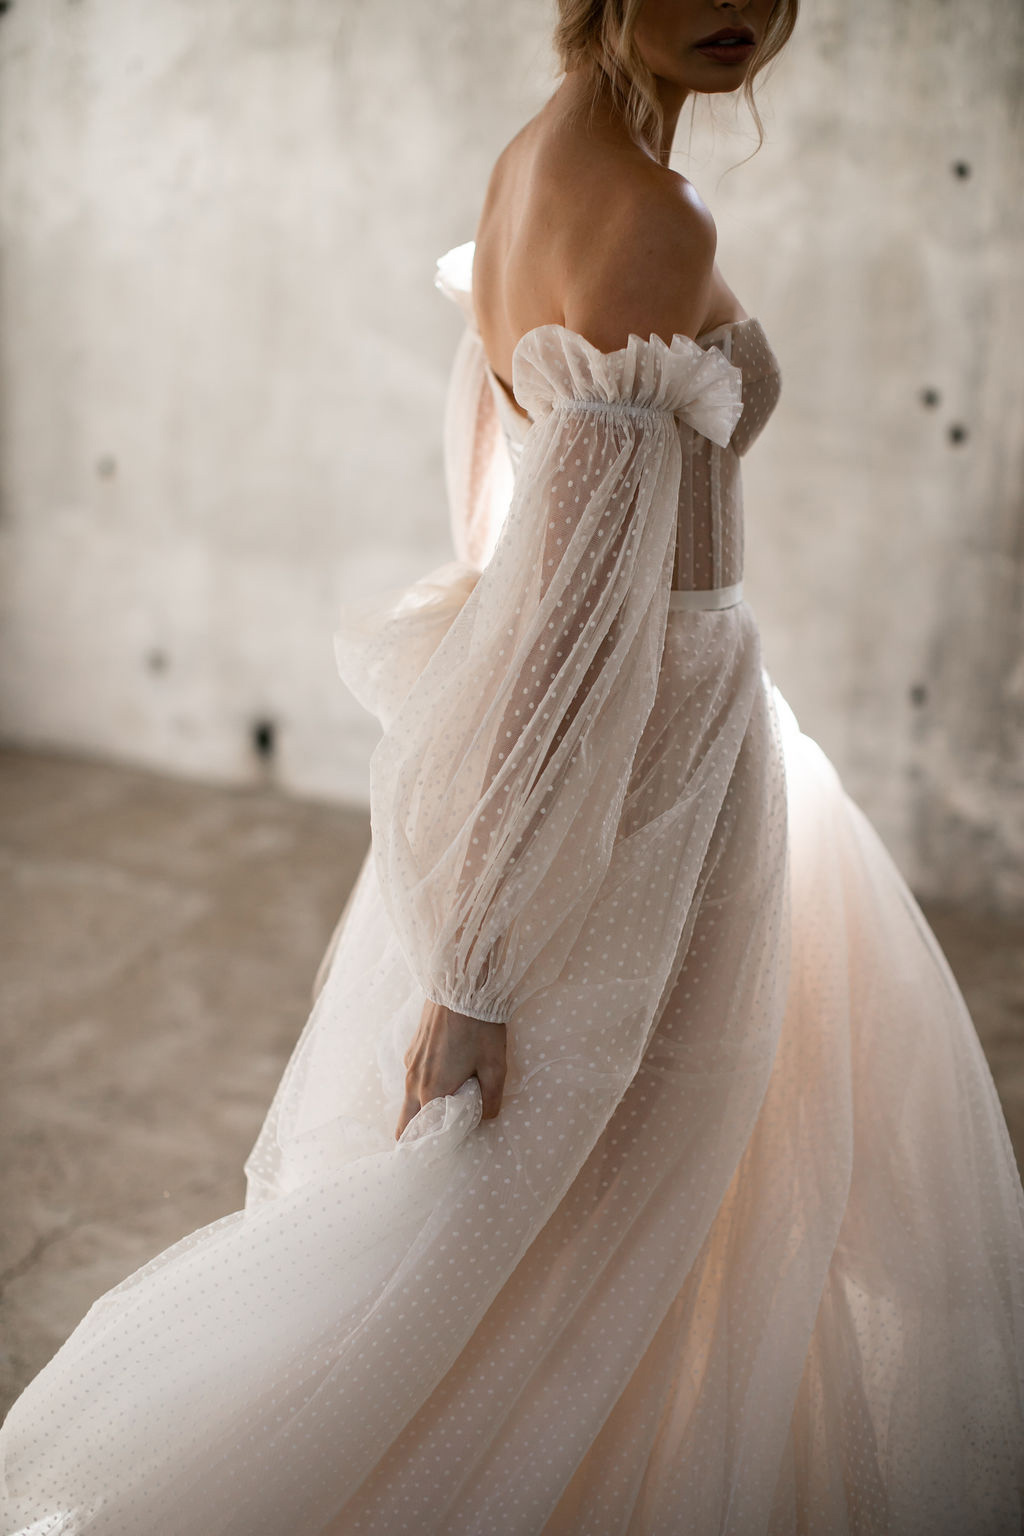 The Audrey wedding dress by Karen Willis Holmes, an a-line classic wedding dress with customizable sleeves